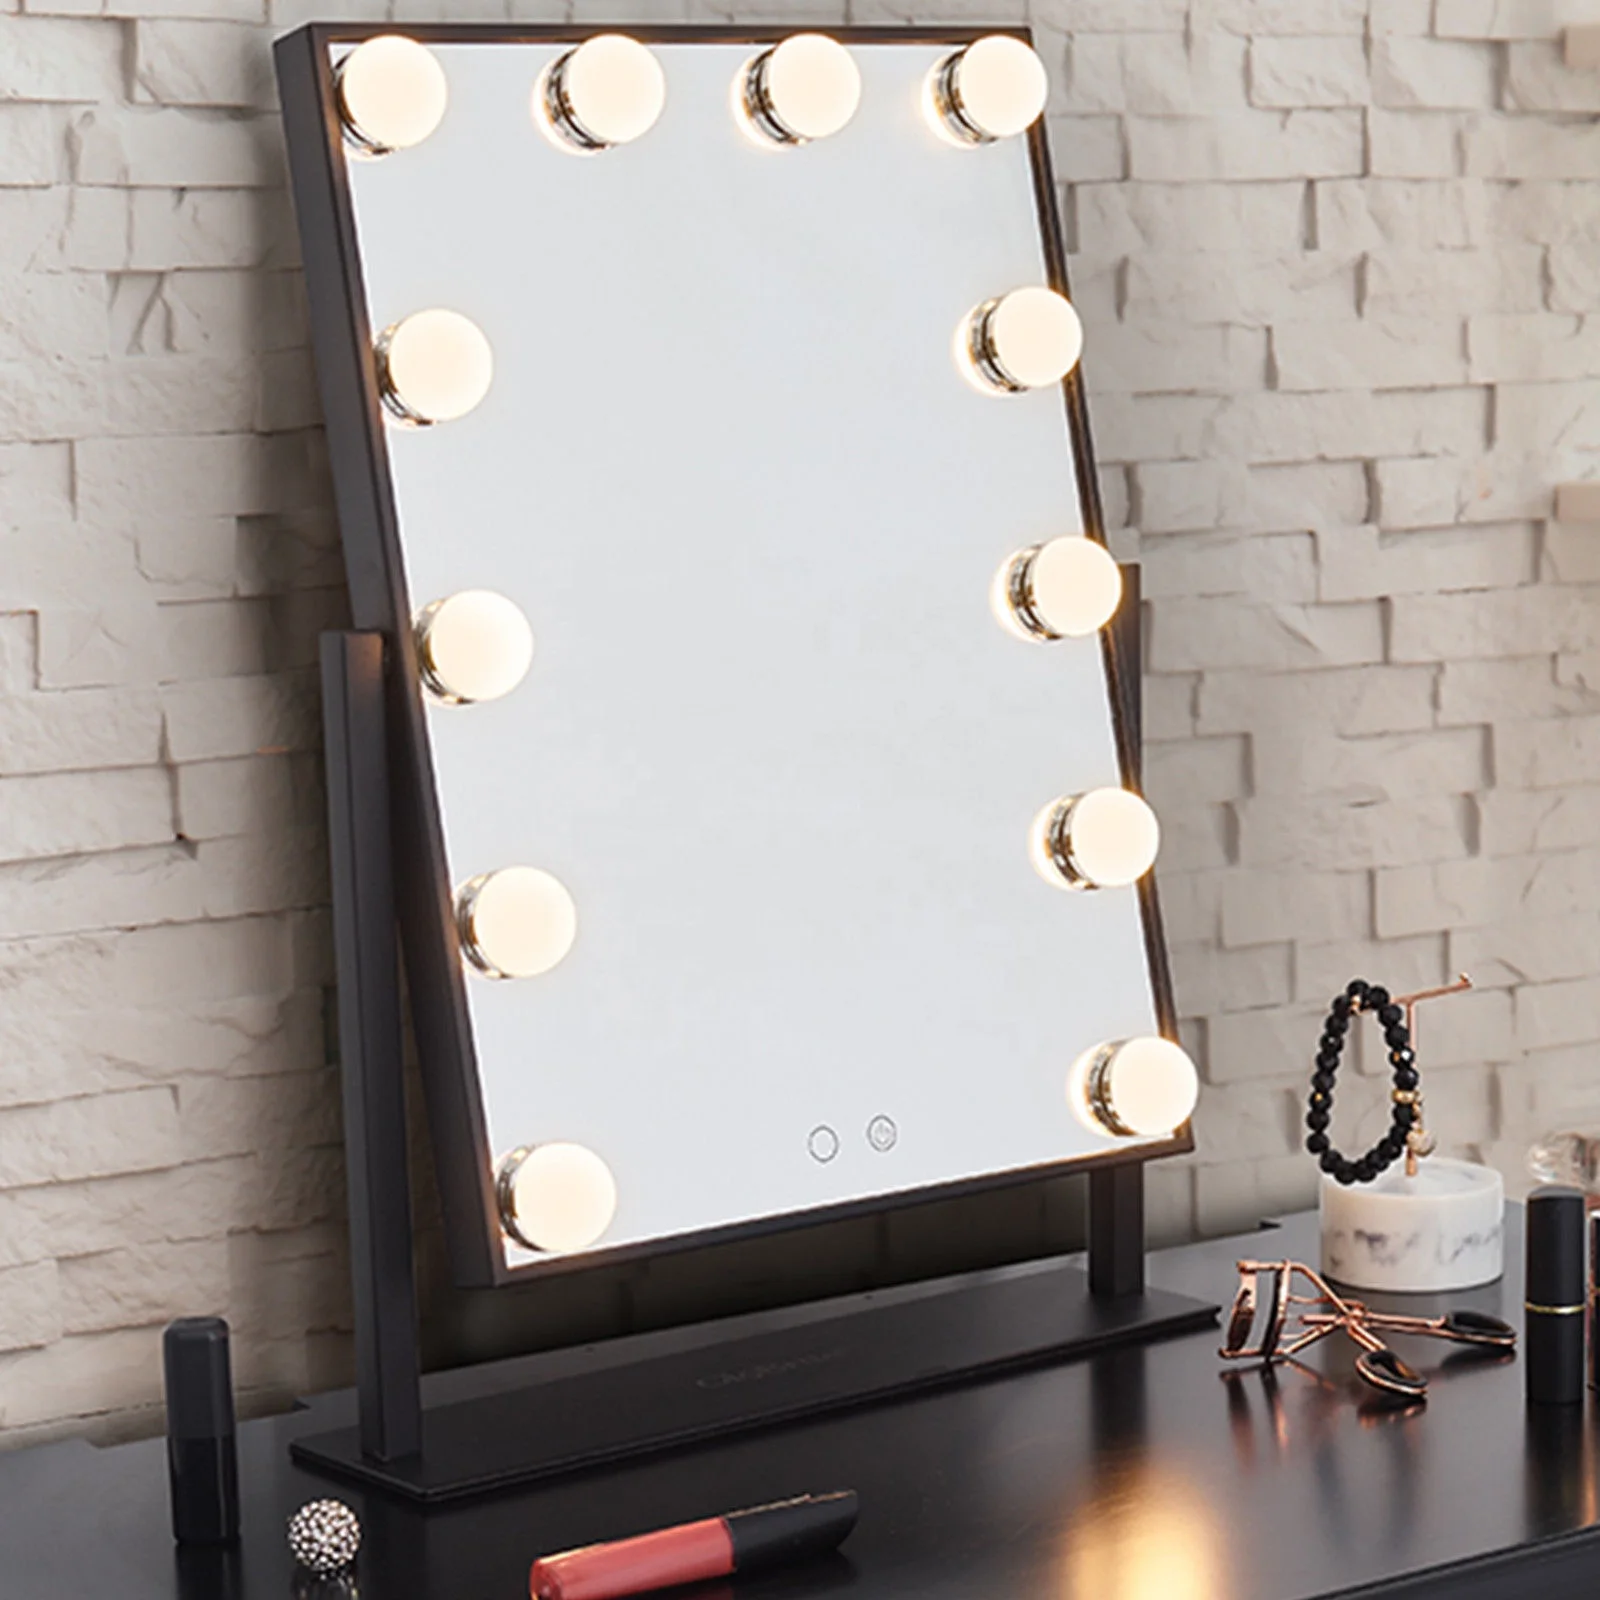 

LED Glam Hollywood Dressing Table Mirror Vanity Lighted Cosmetic Dimmable 12 Bulb, Black /white /pink/ rose gold / gold